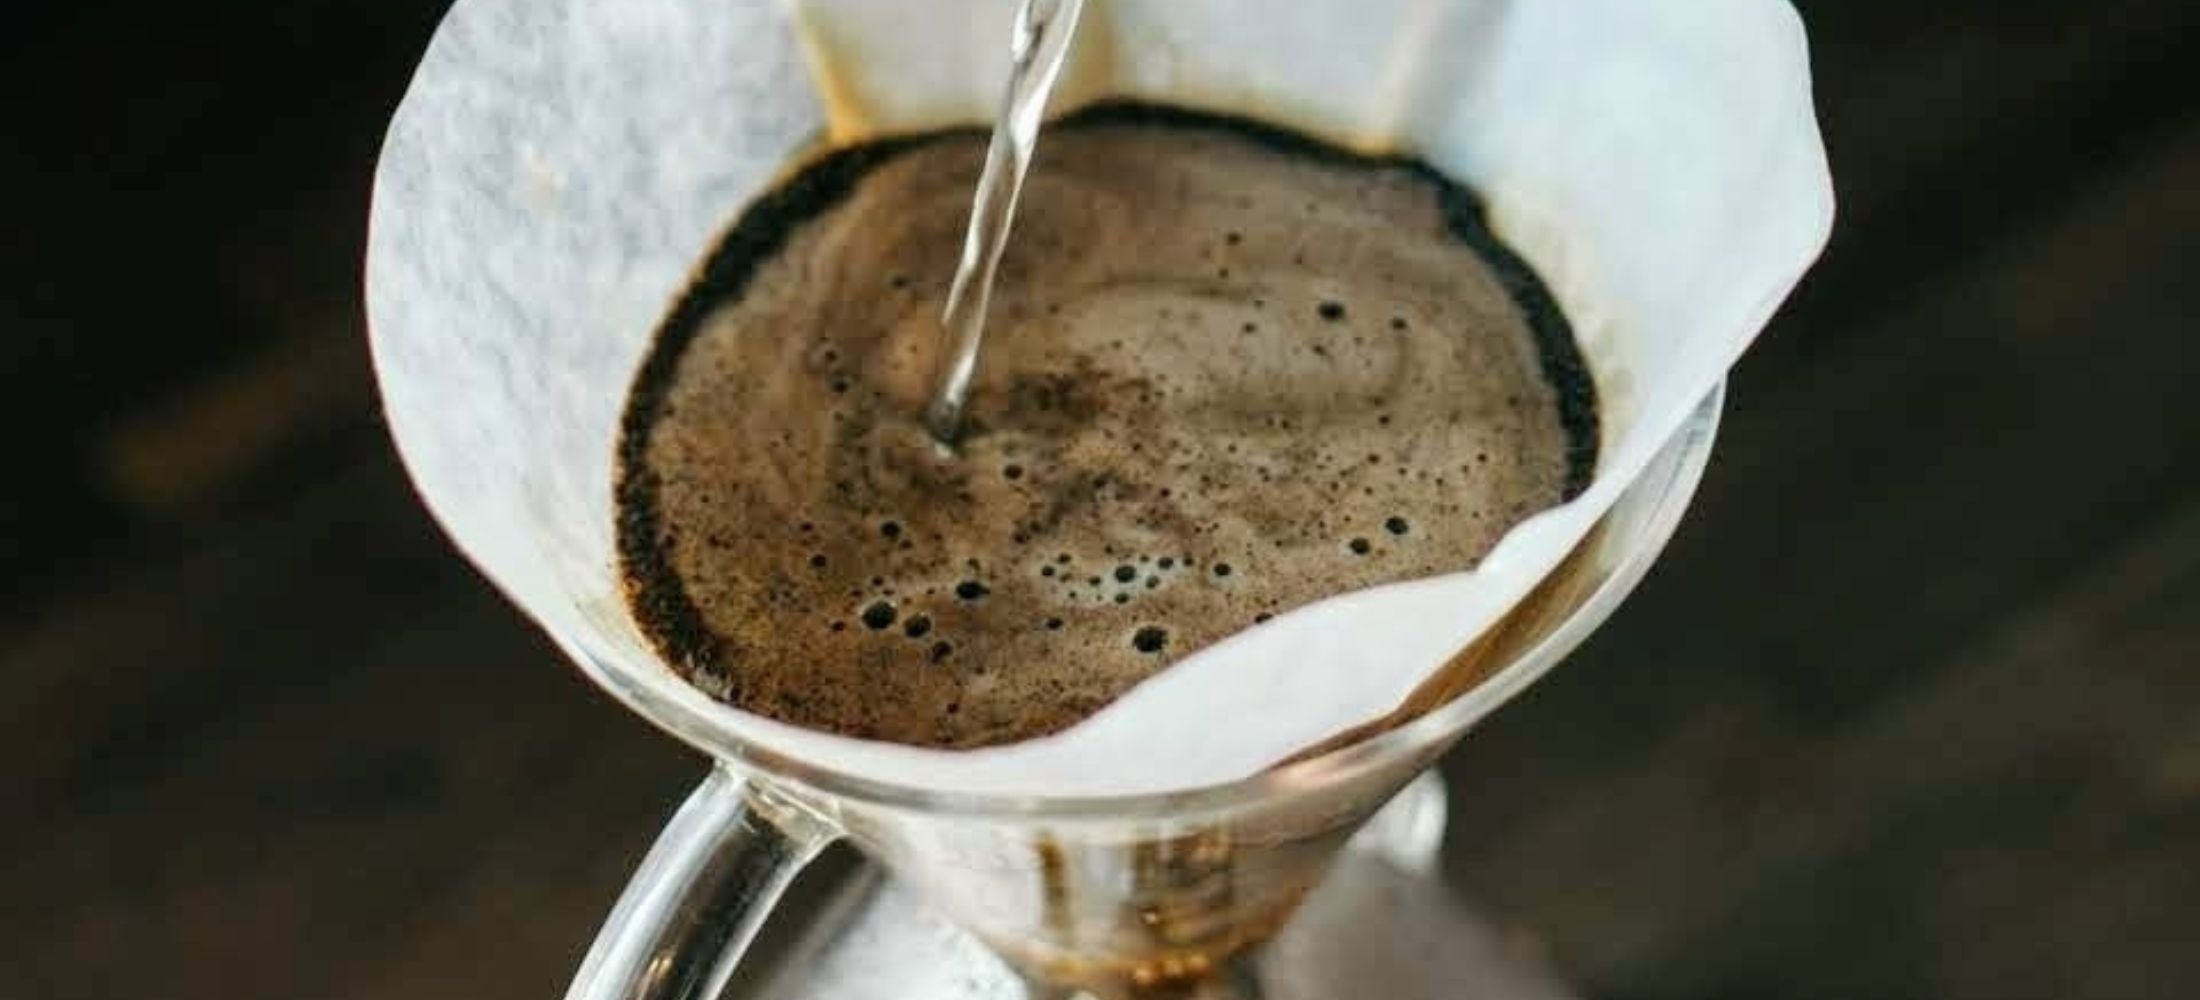 The Ultimate Guide to Barista Tools for Home Brewing